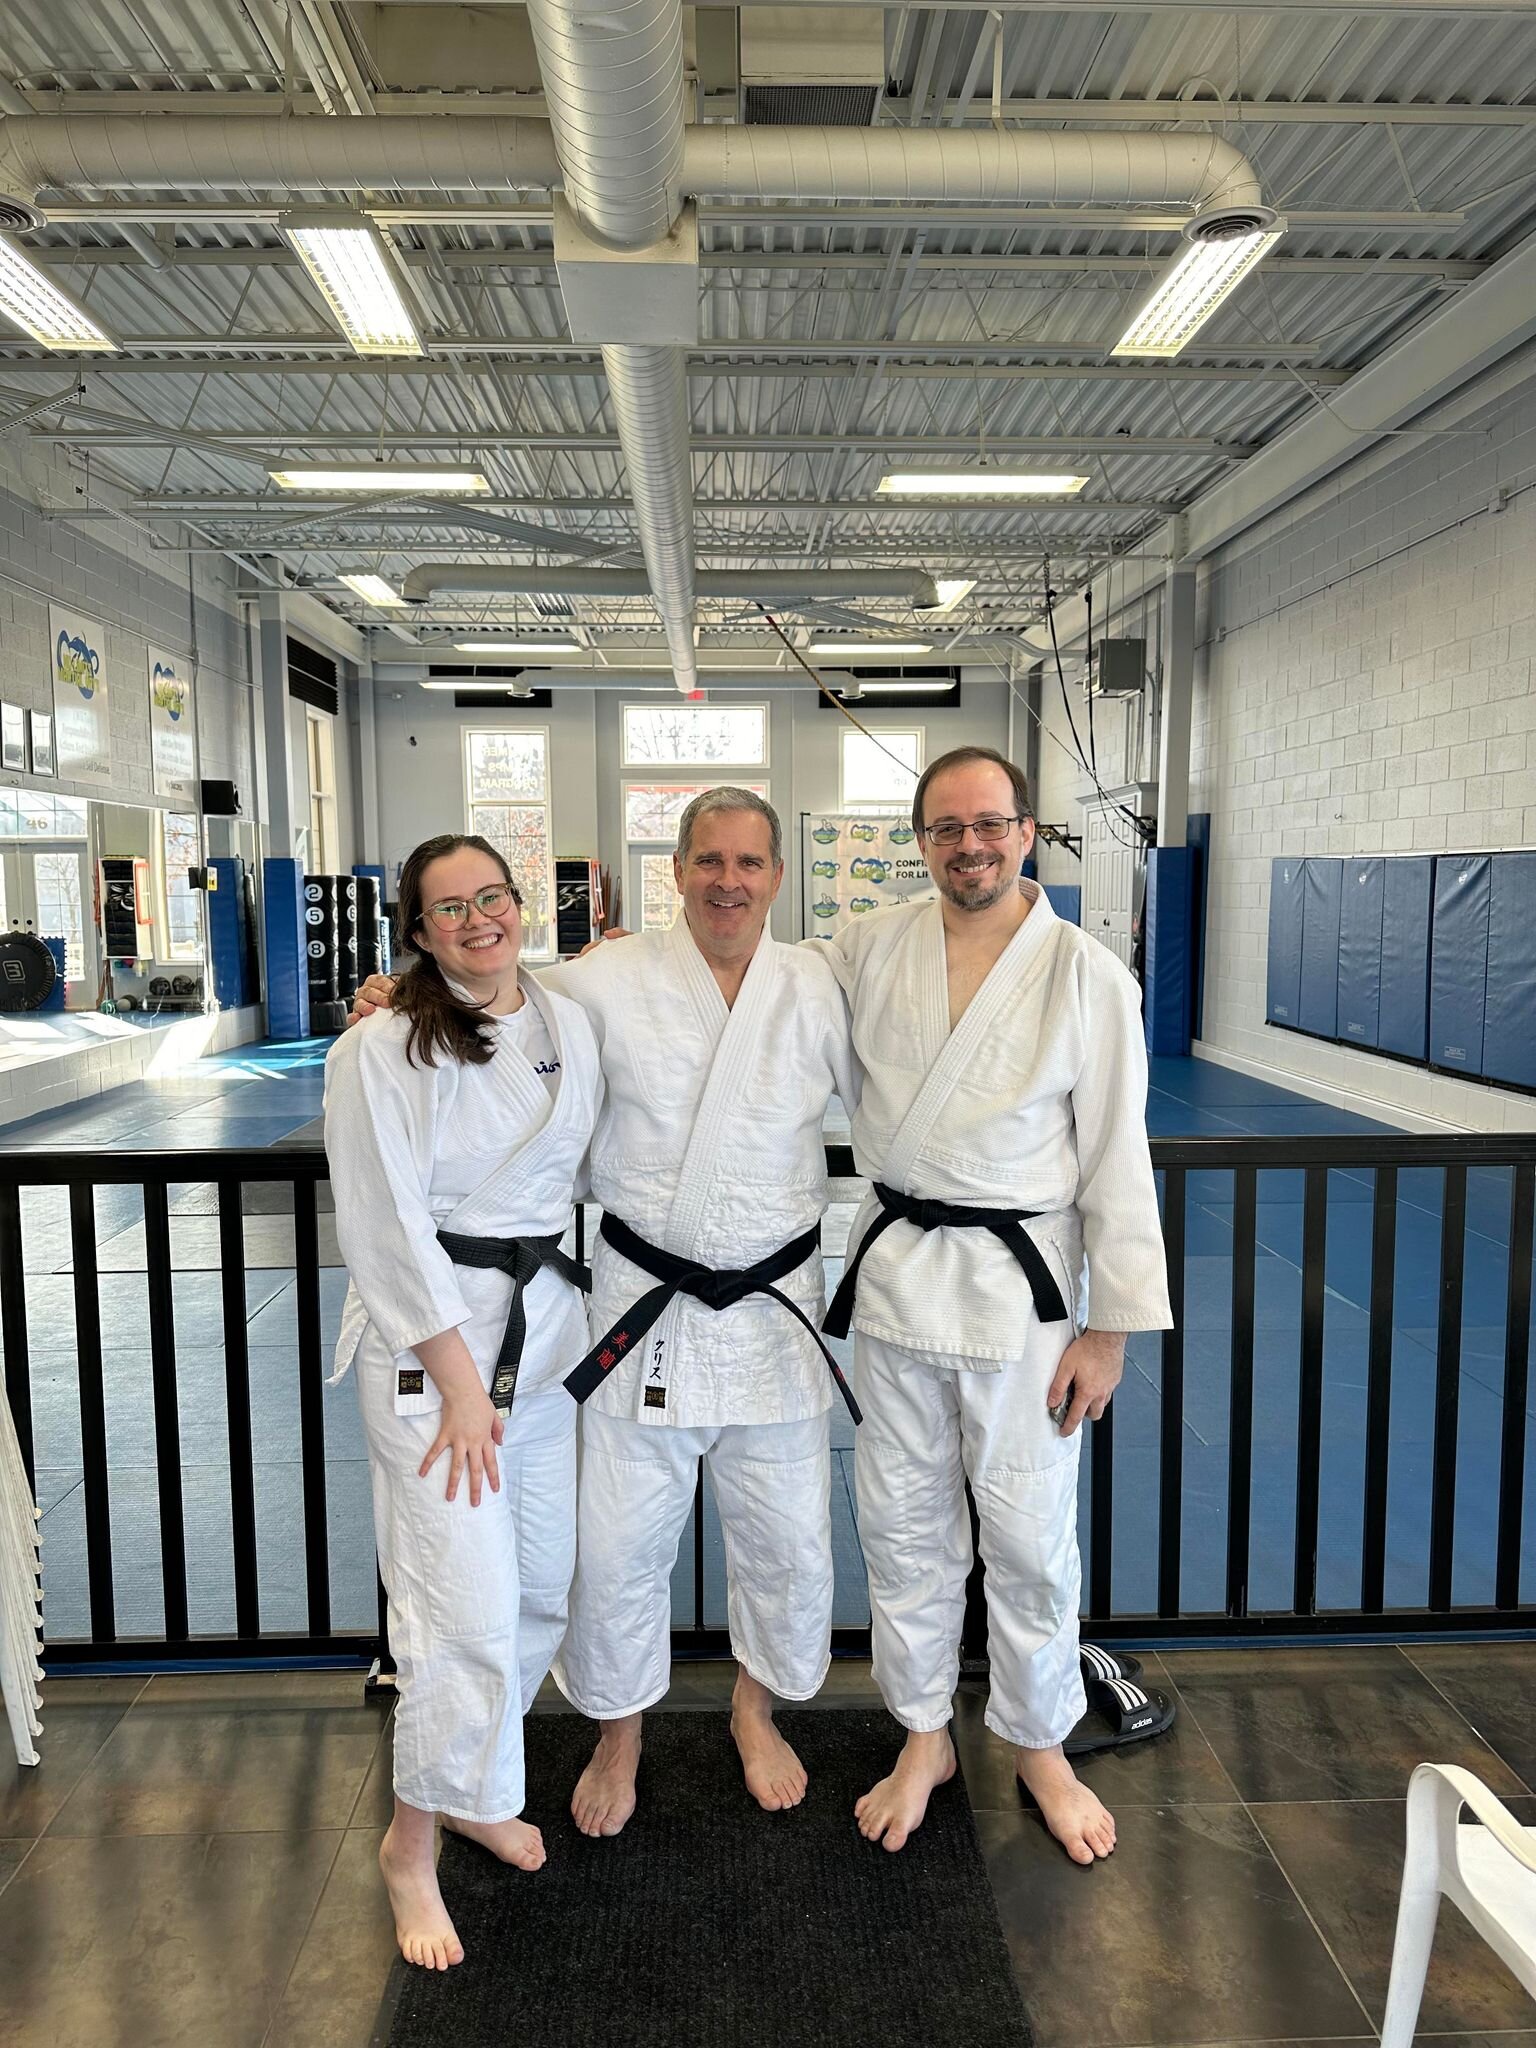 Keilikhis sensei and Wright sensei visited Christopher Johnston sensei at the Shindokan dojo in Oakville for his monthly Kenshu (research) class for black belts this morning. We studied aspects of kuzushi, connection, and using kamae to generate powe